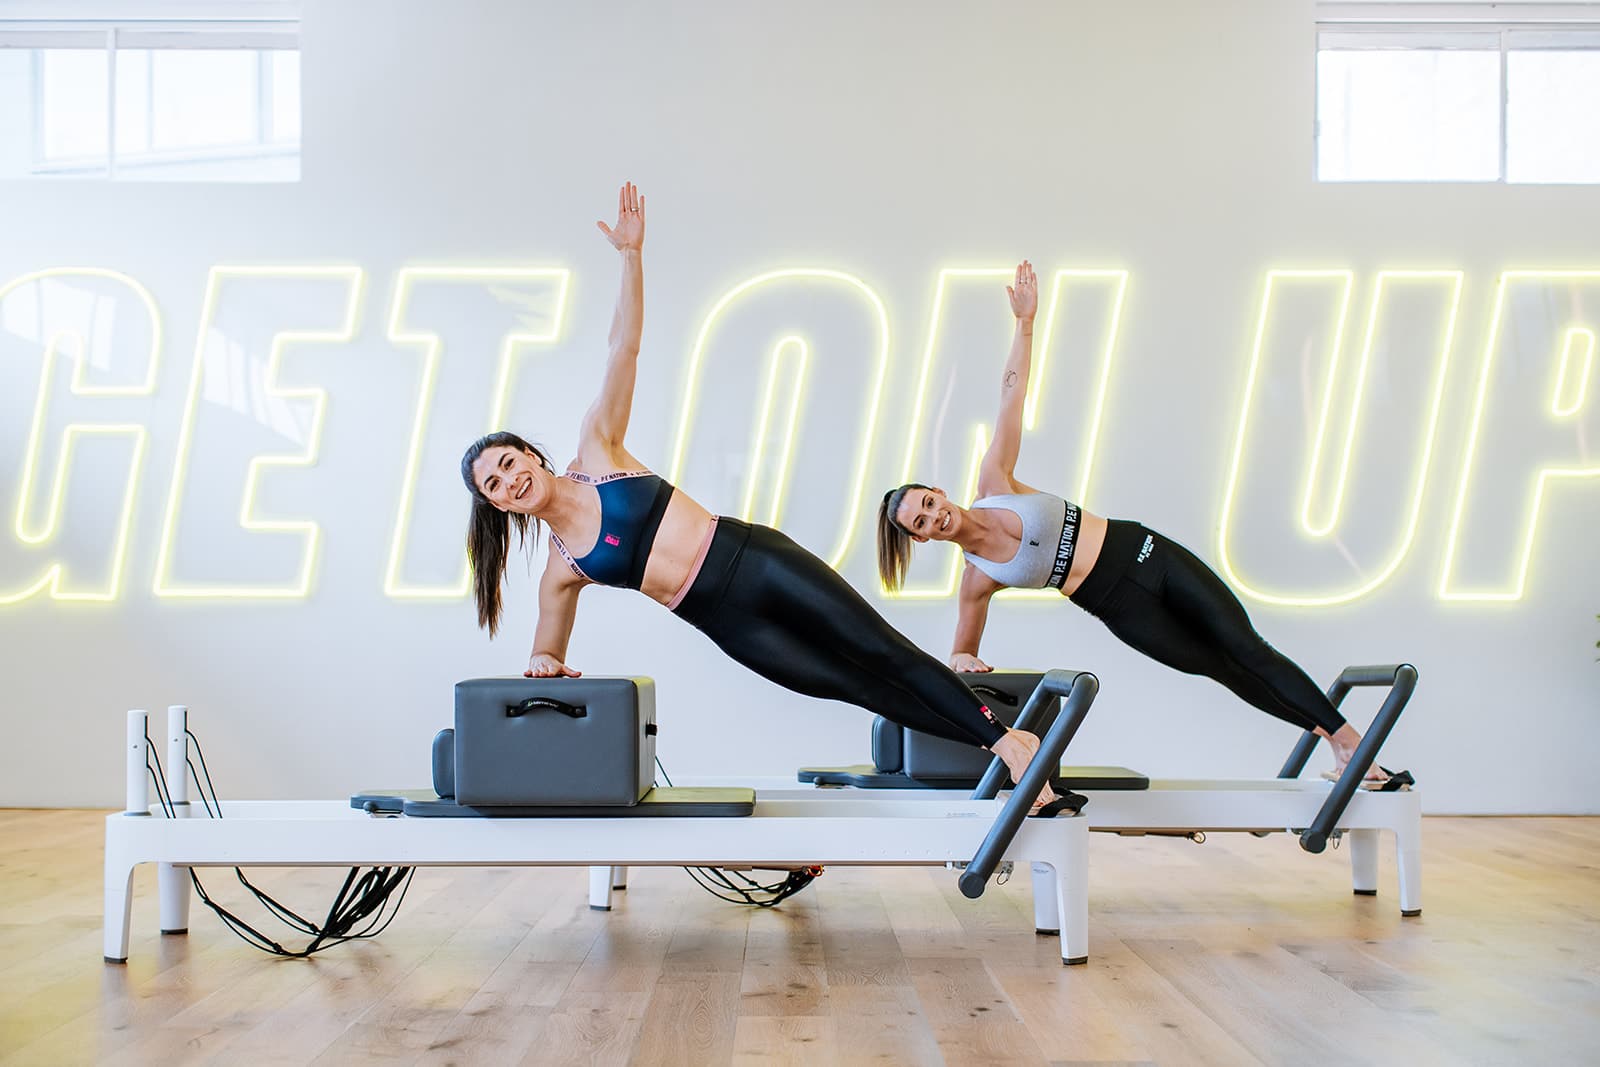 Two women hold strong side planks at Upstate Studios Newtown. They enjoy working out in a fresh bright space with windows and yellow neon signage.